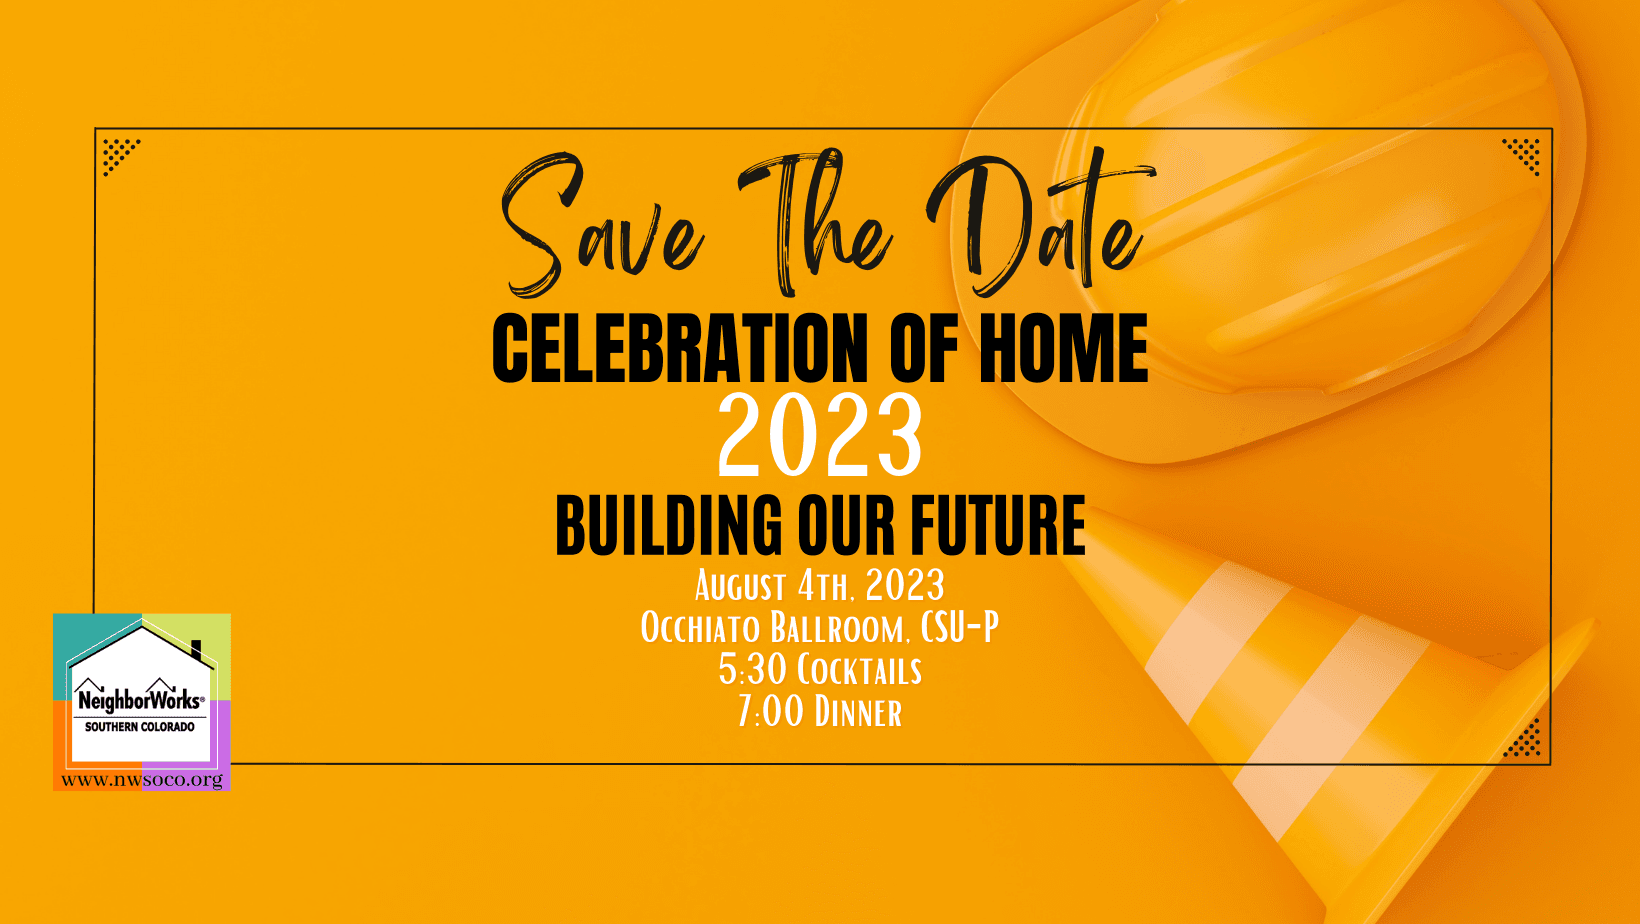 Save the Date for COH 2023